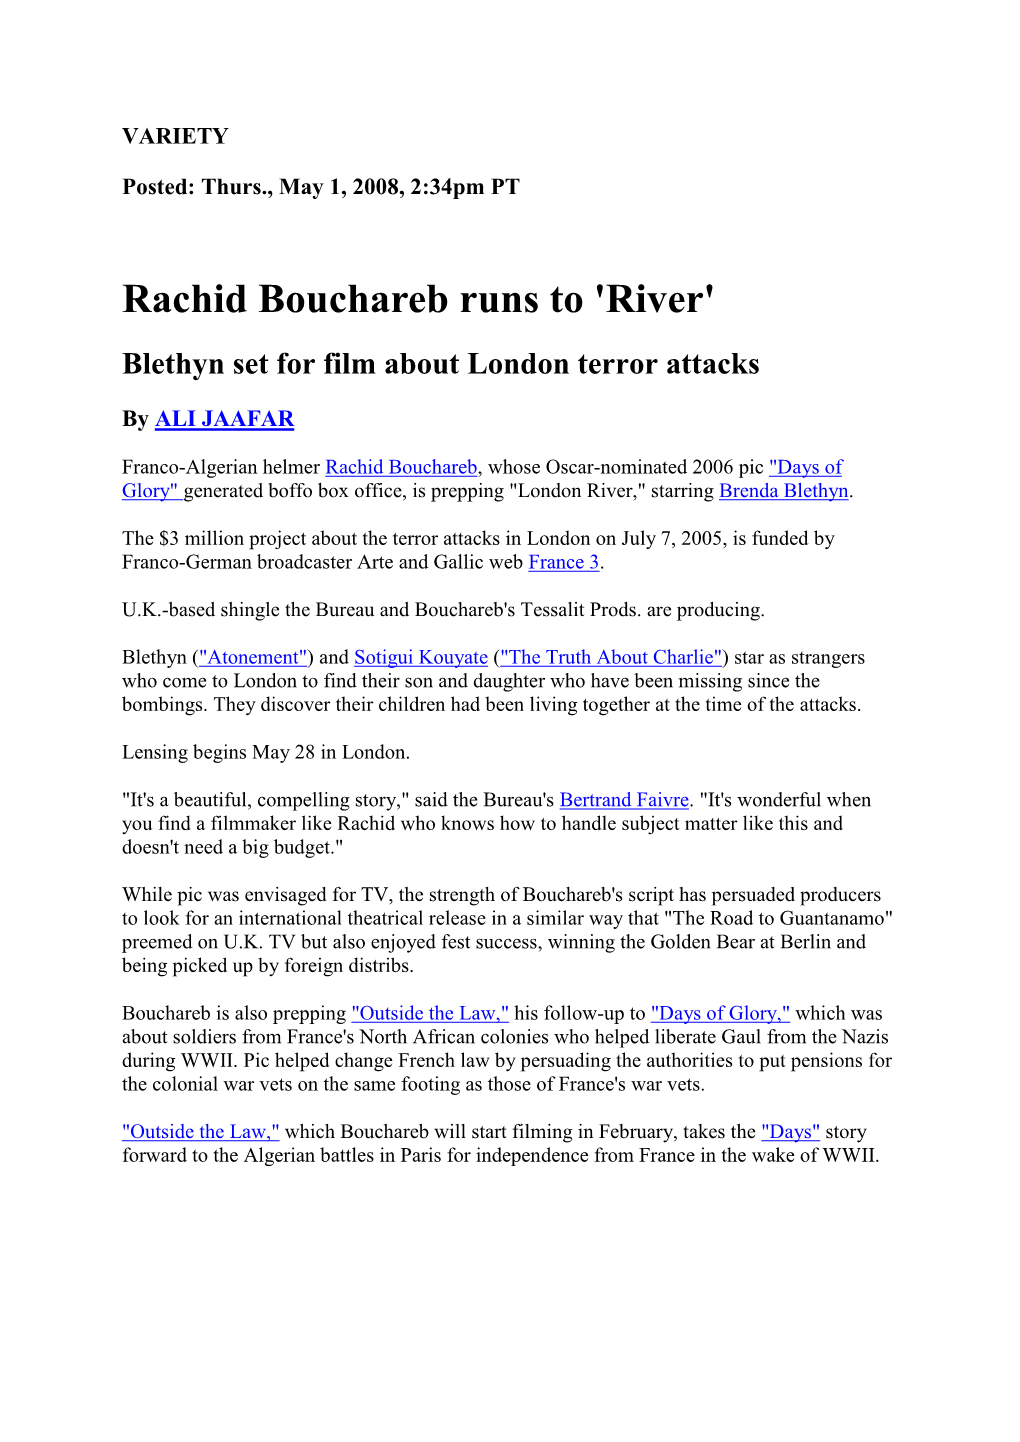 Rachid Bouchareb Runs to 'River' Blethyn Set for Film About London Terror Attacks